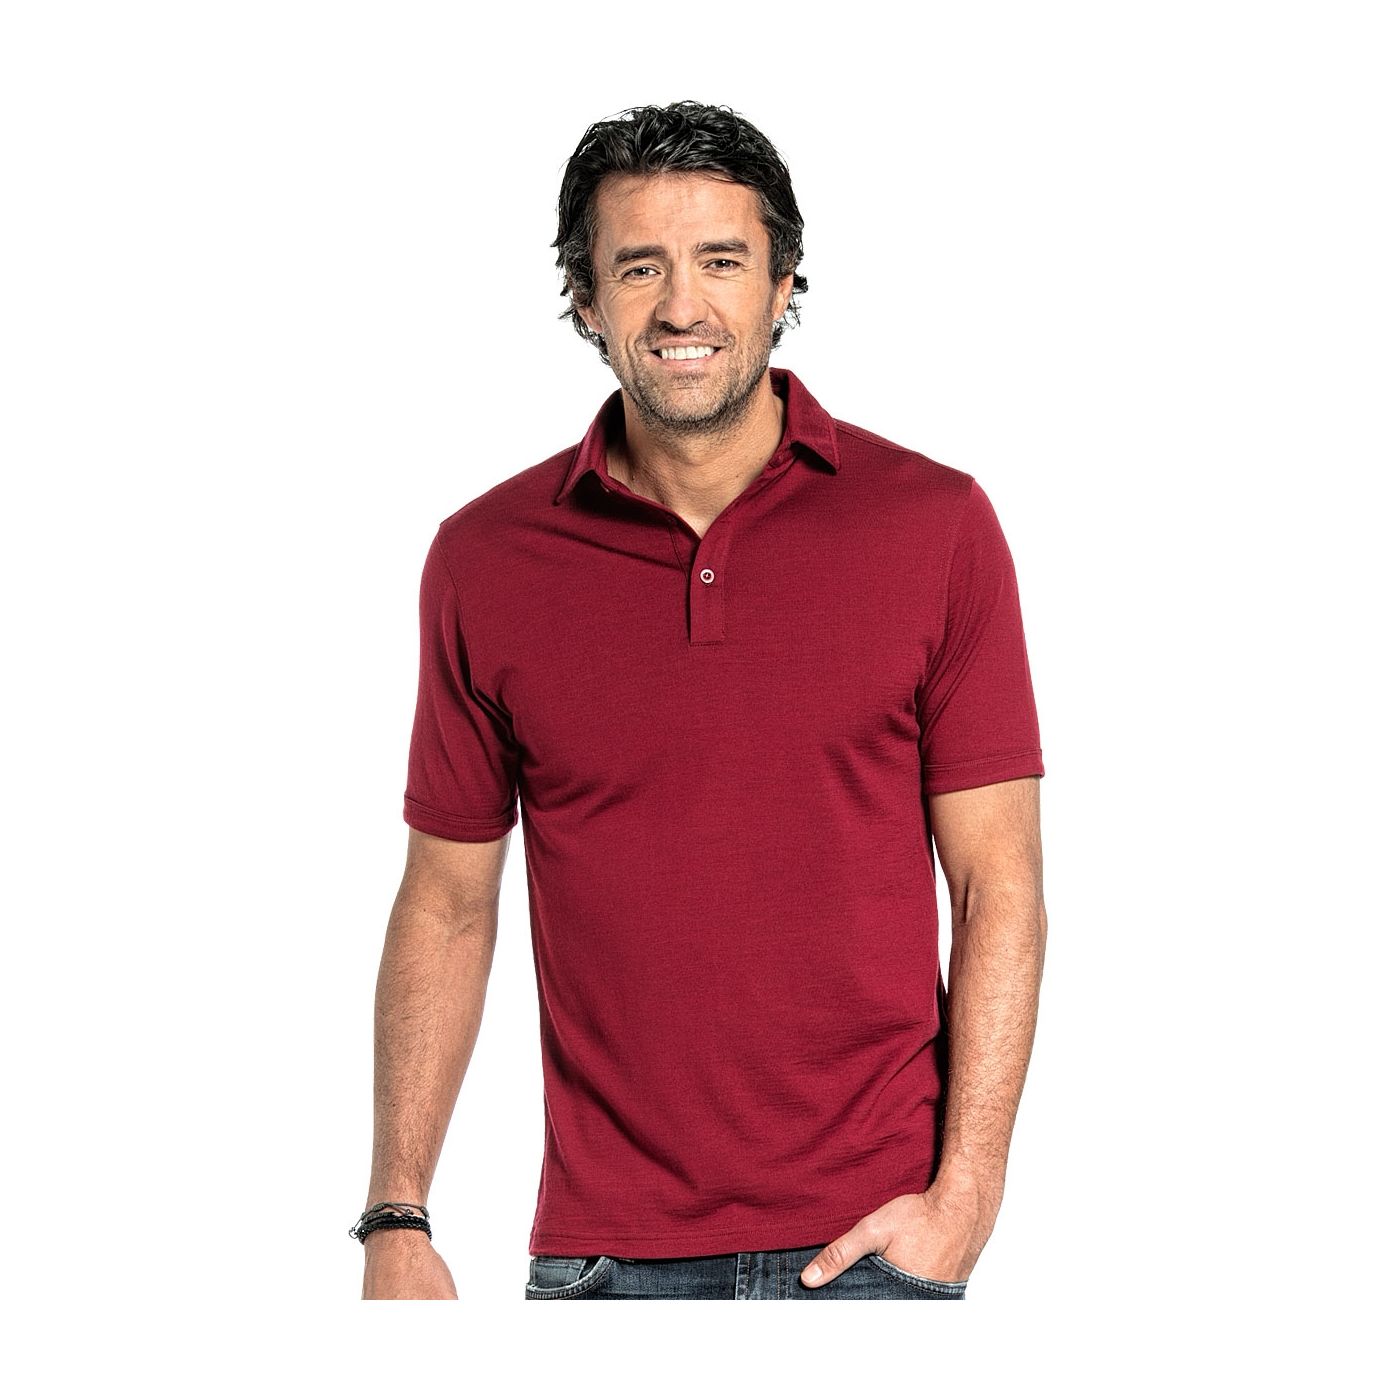 Polo shirt for men made of Merino wool in Red